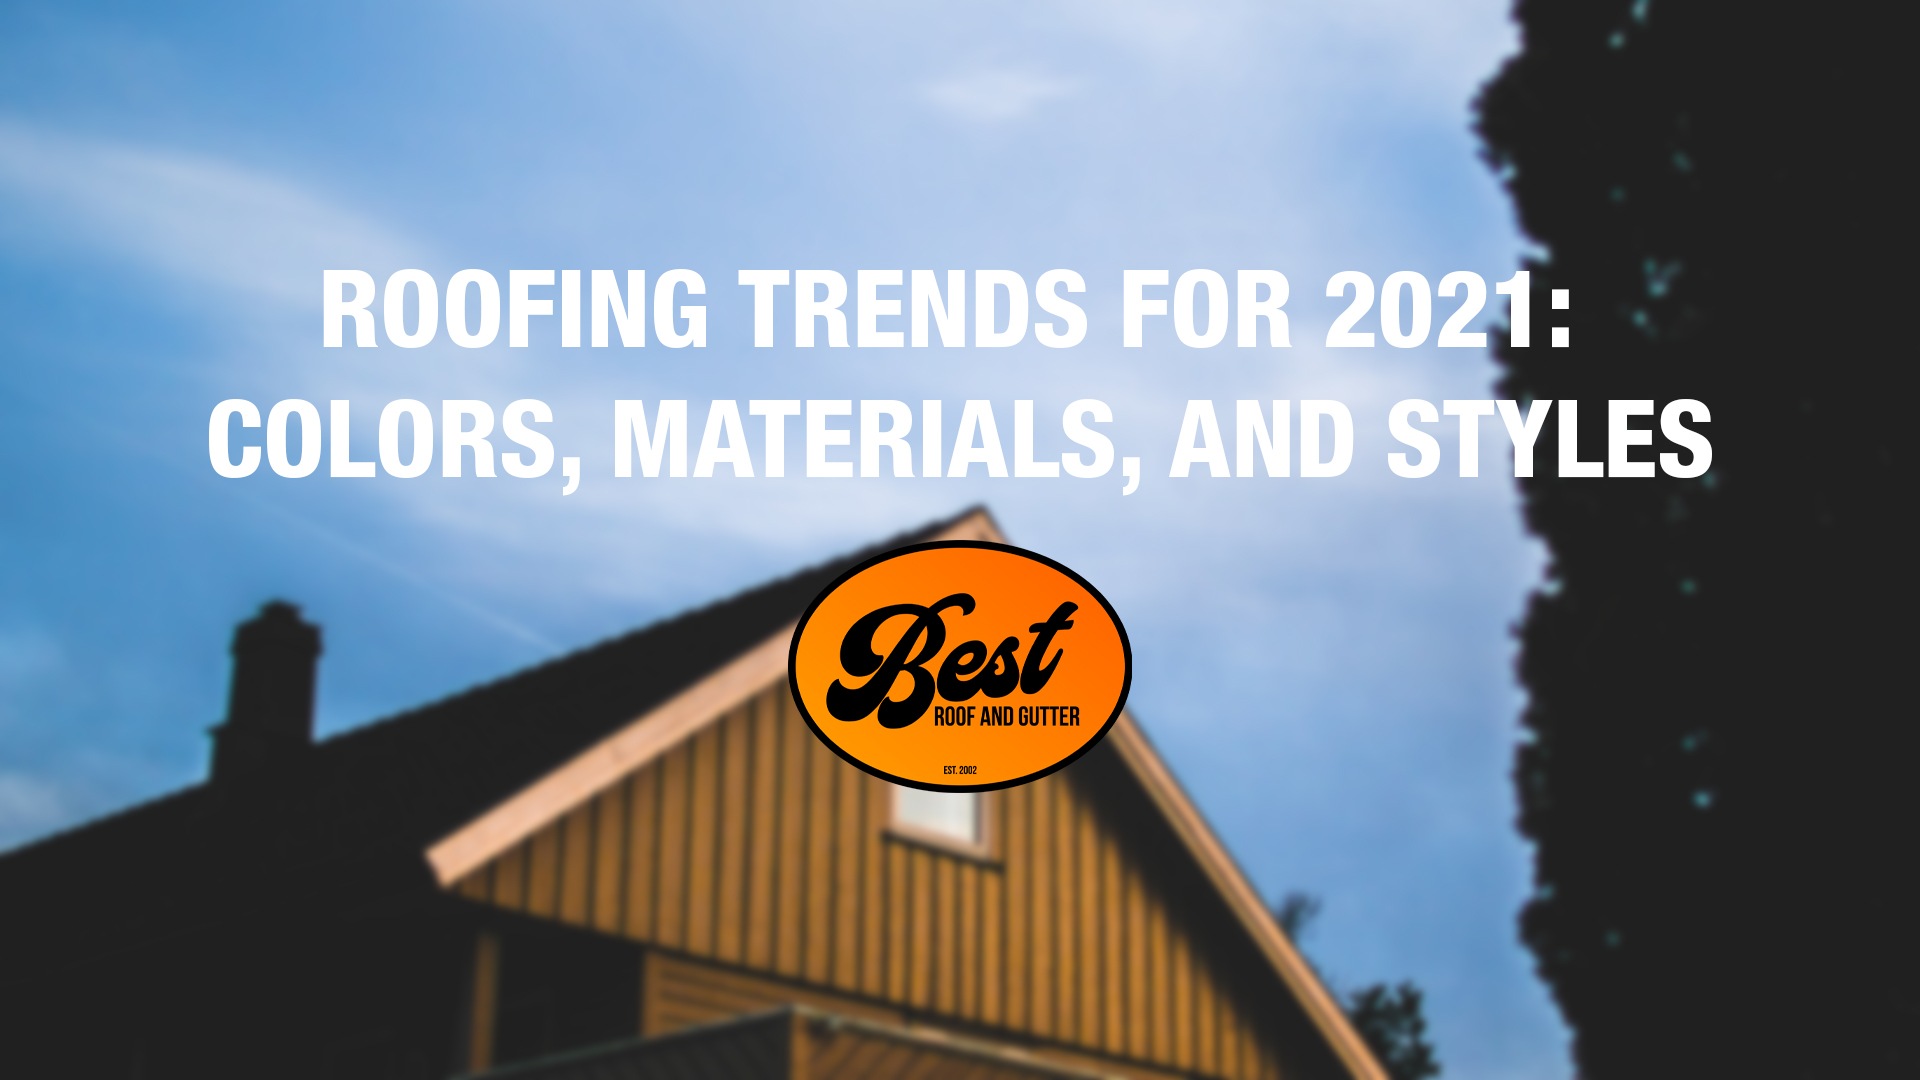 Roofing Trends For 2021: Colors, Materials, and Styles